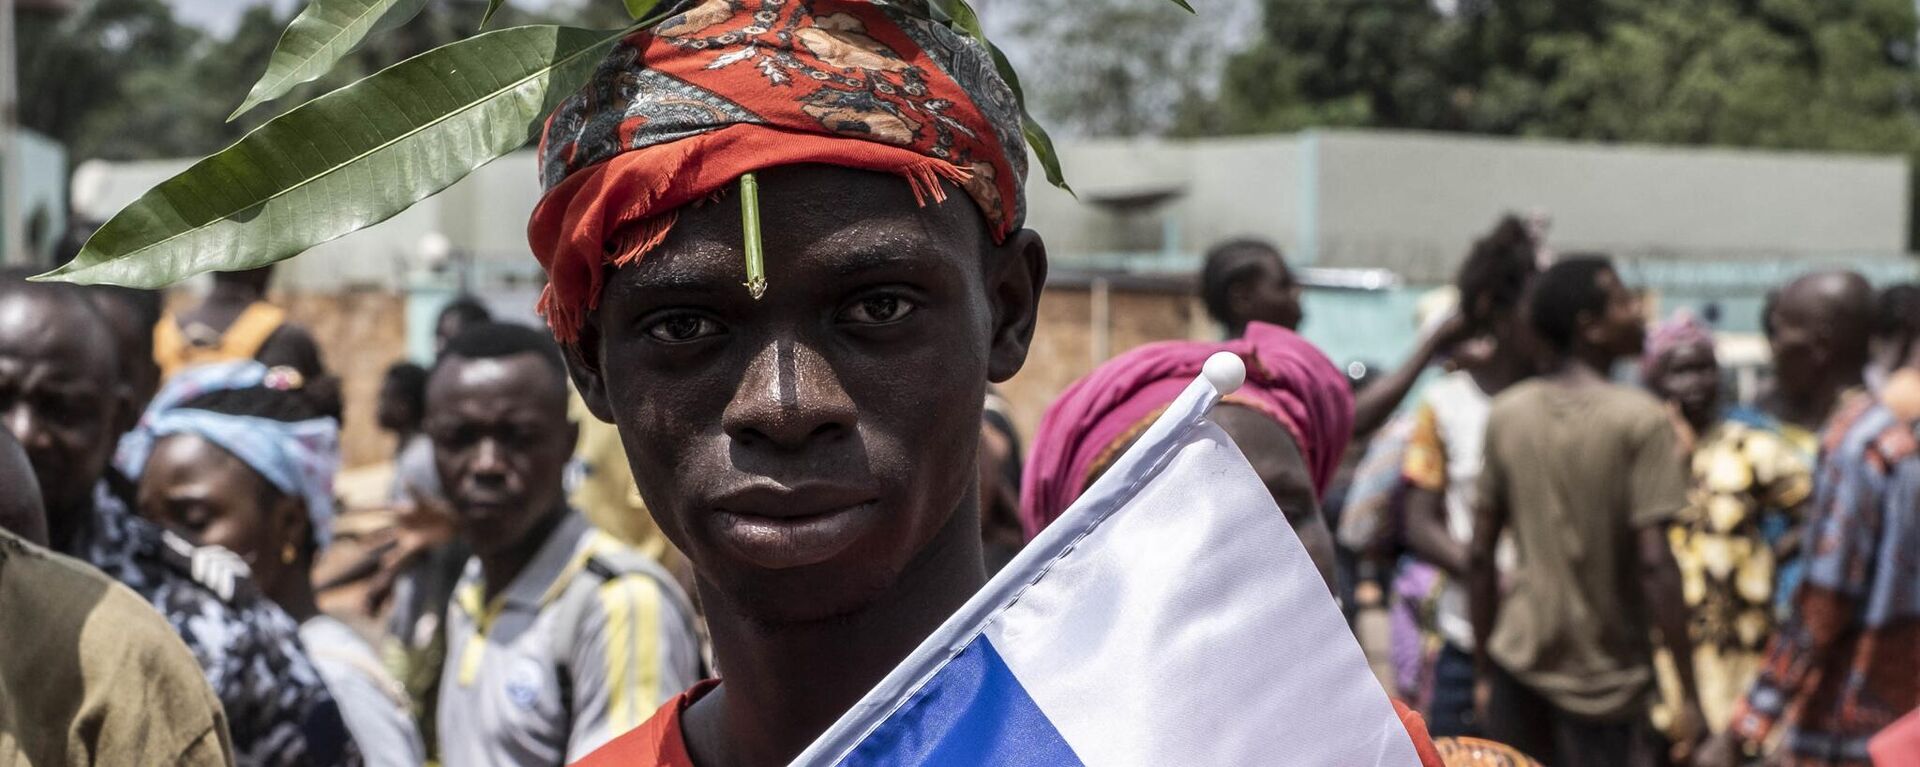 A demonstrator with foliage on to his head, a sign of compassion in Central African Republic, holds a Russian flag with the emblem of Russia on while posing for a portrait in Bangui, on March 22, 2023 during a march in support of Russia and China's presence in the Central African Republic. - Sputnik Africa, 1920, 19.04.2023